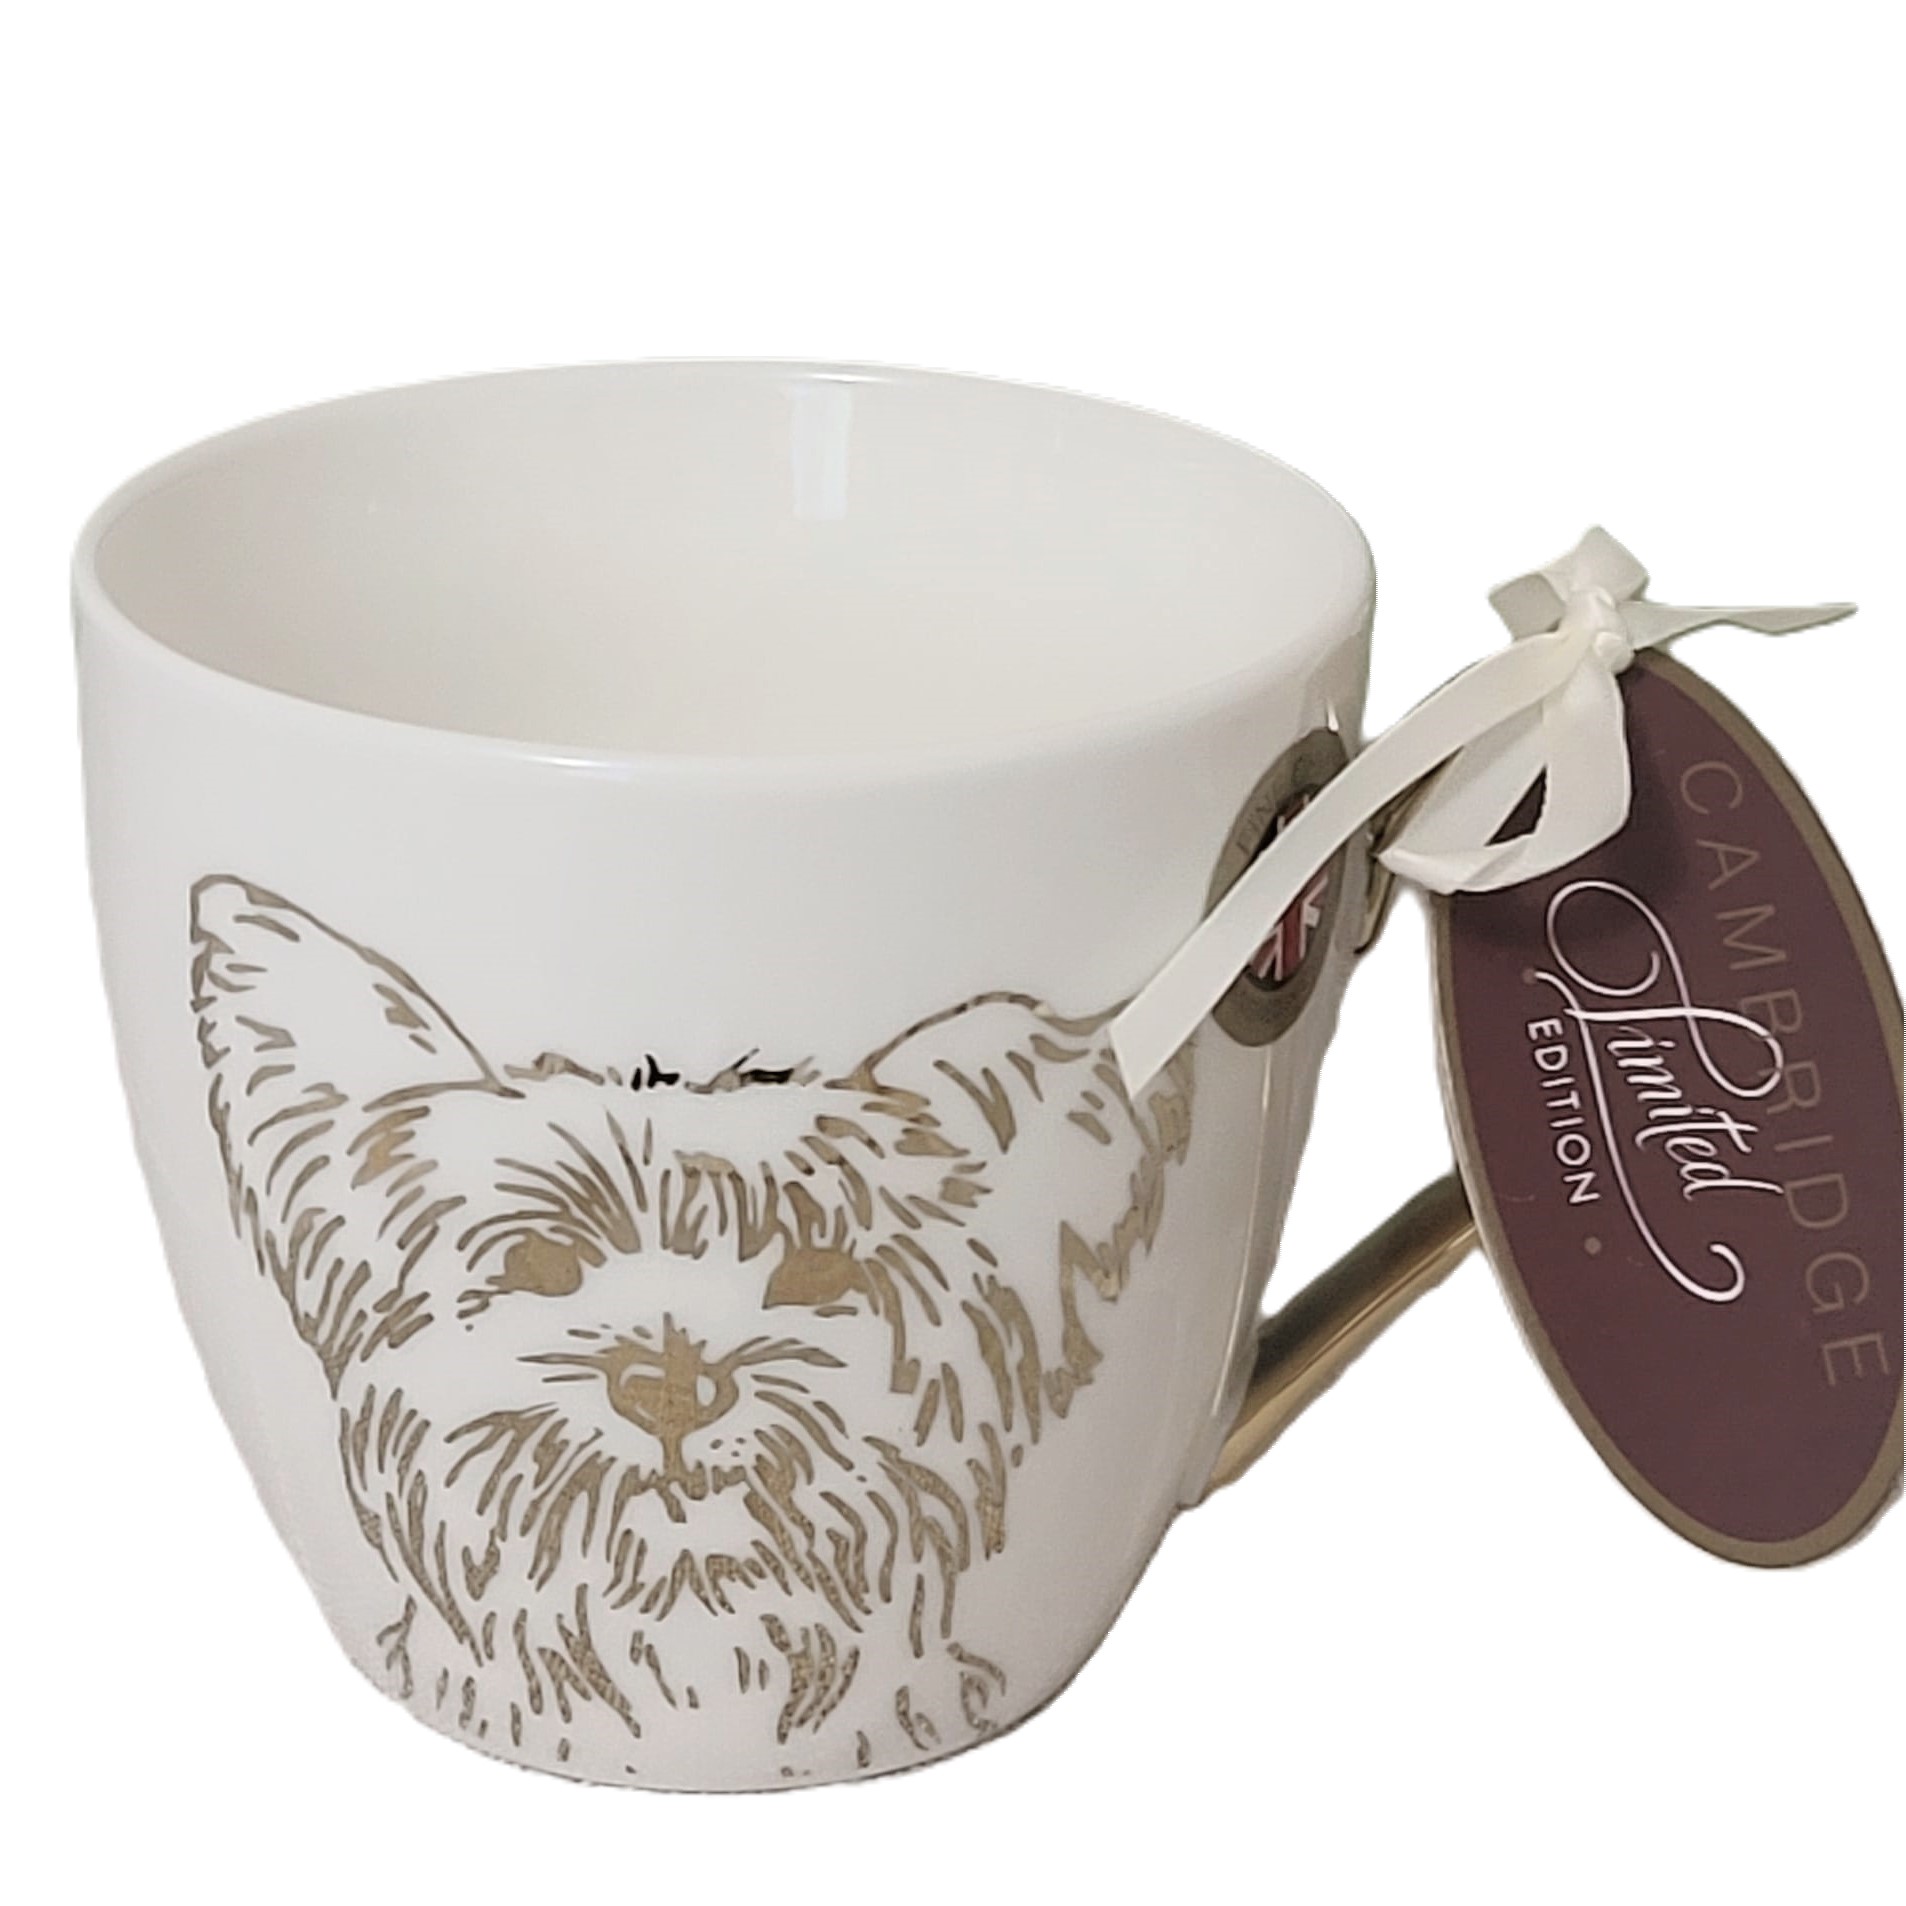 Cambridge Limited Edition Mug Cup Yorkie Yorkshire Terrier nwt - Click Image to Close